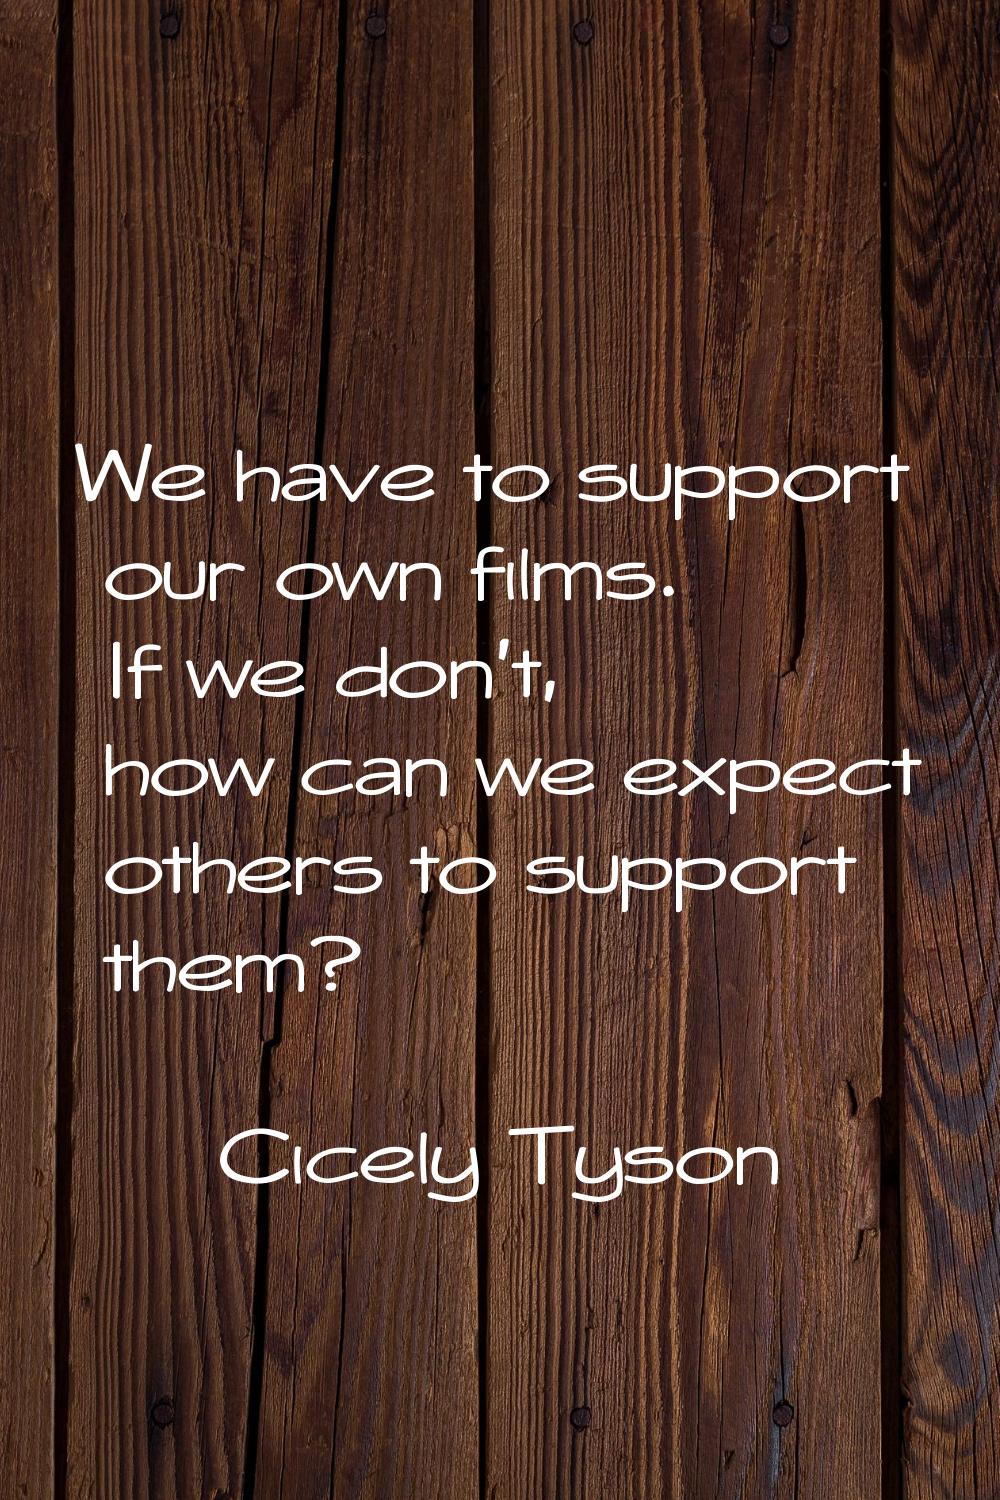 We have to support our own films. If we don't, how can we expect others to support them?